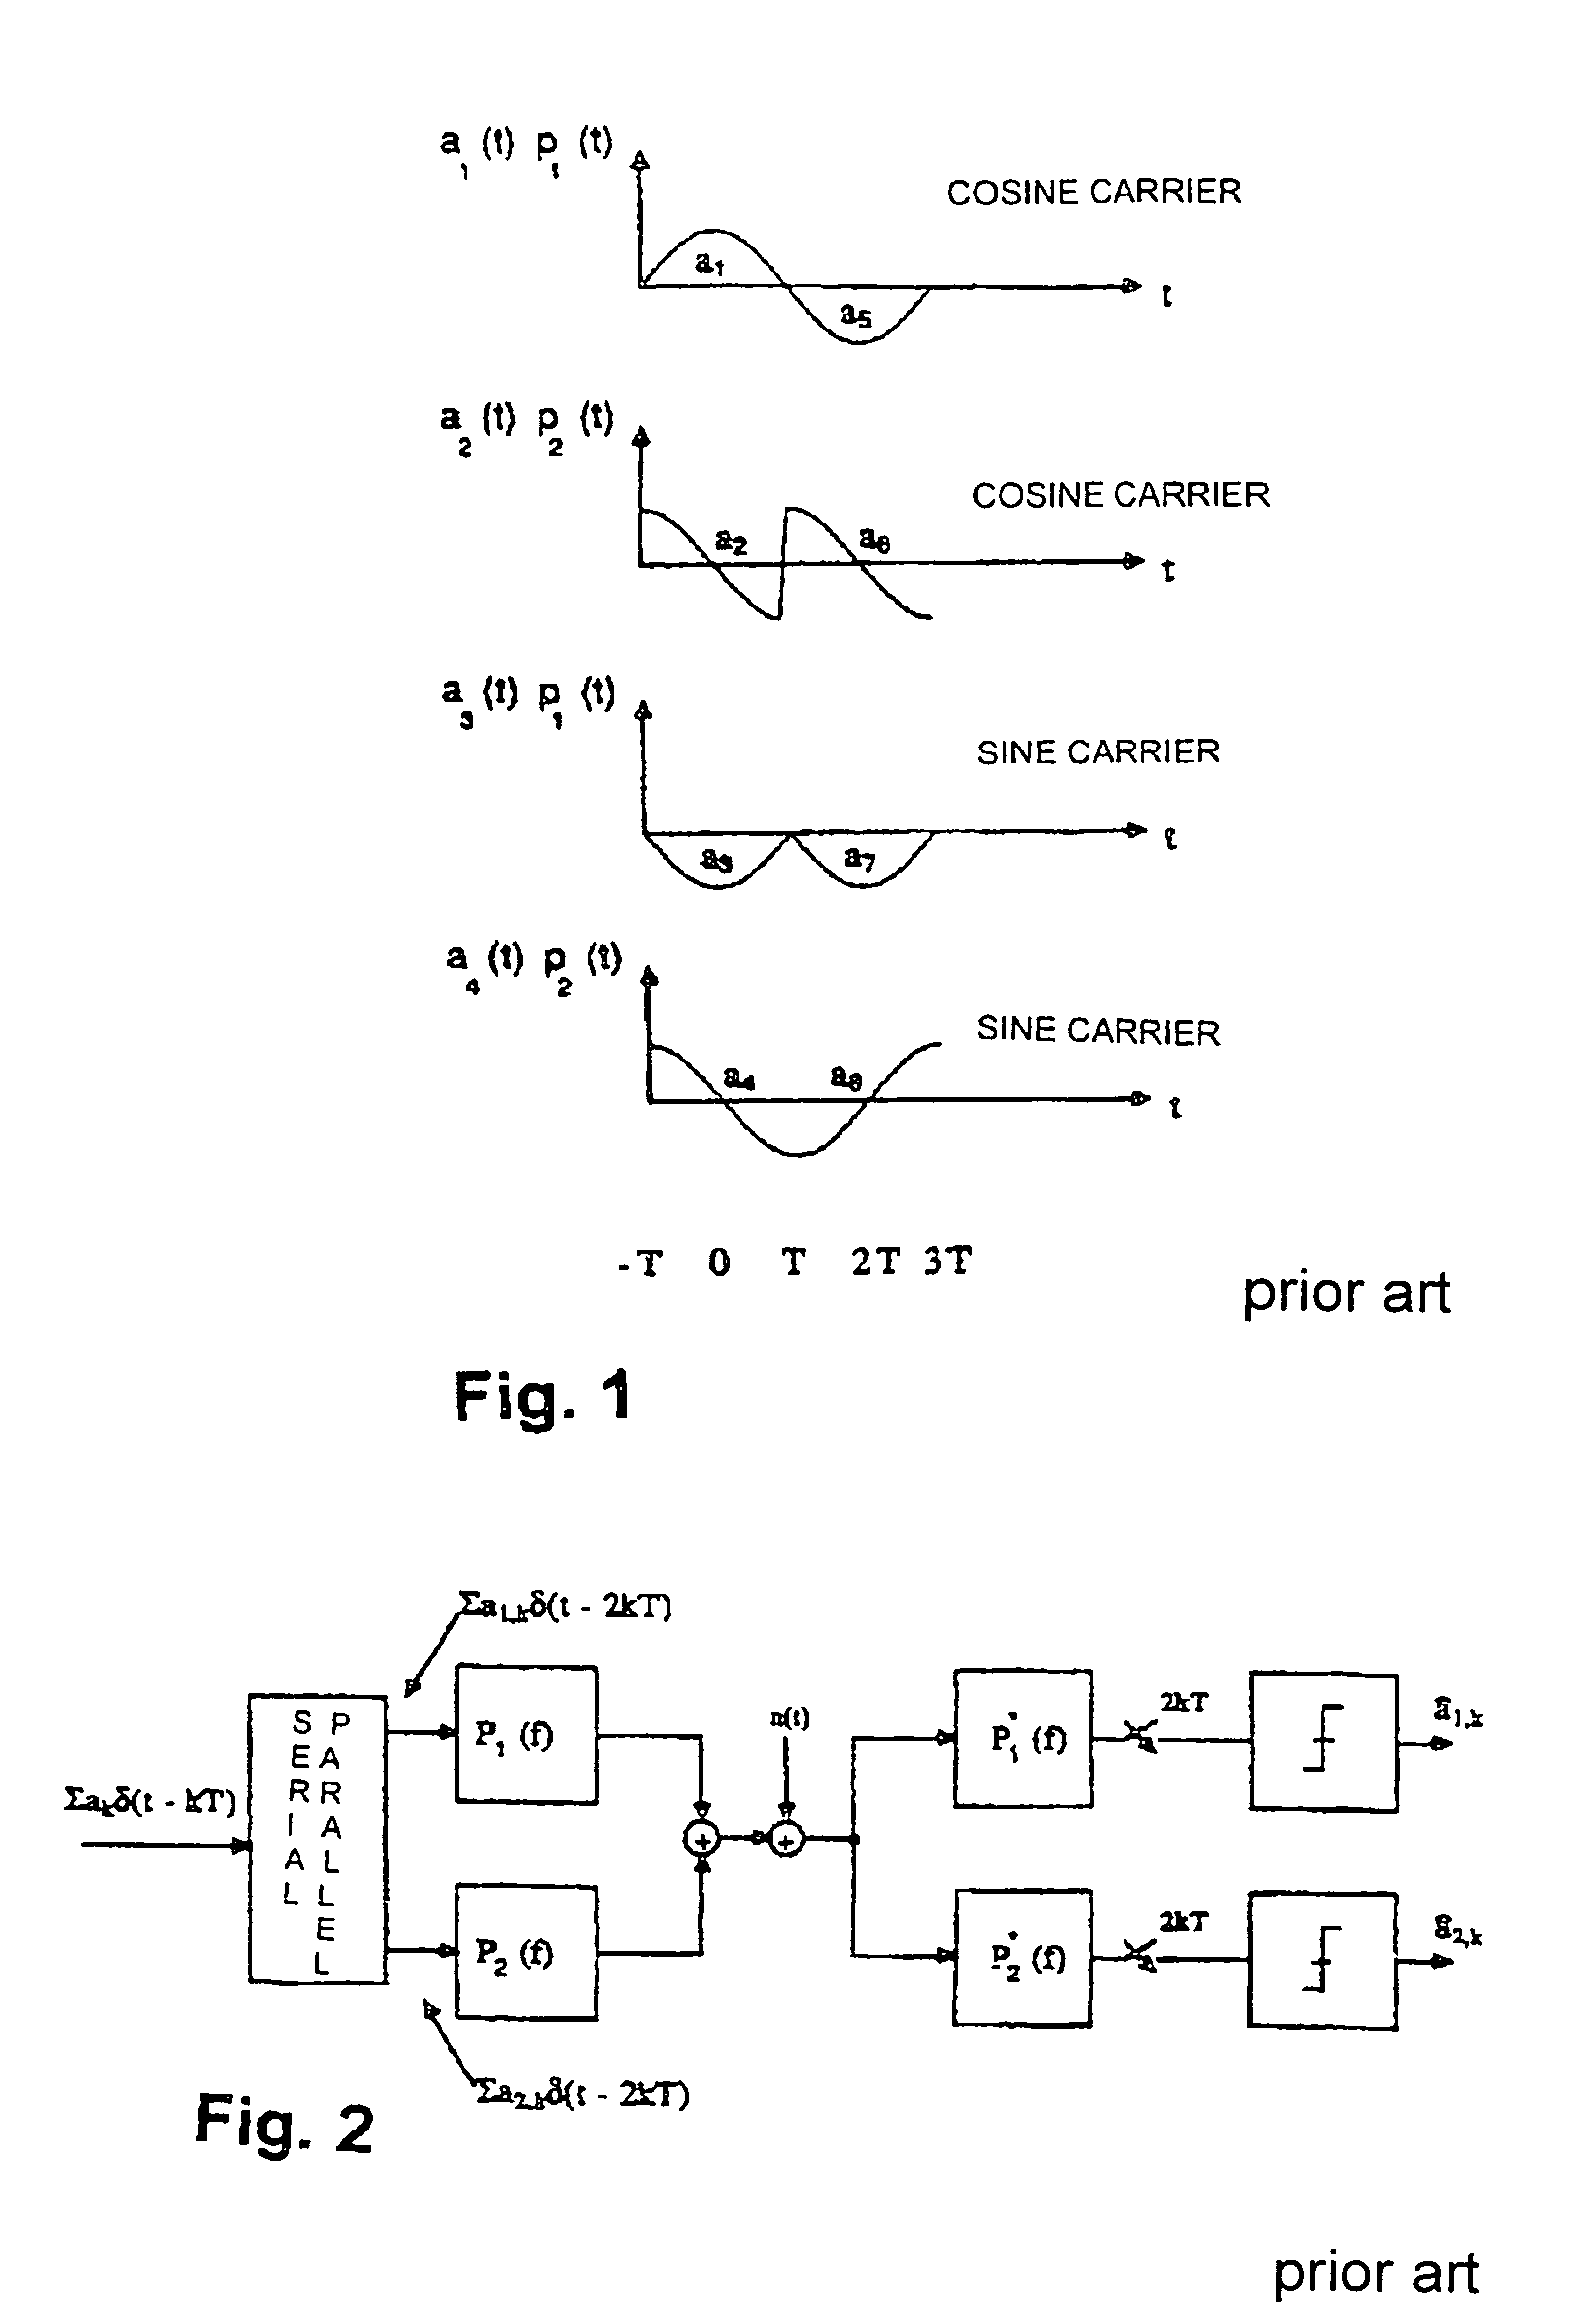 Method for dividing the bit rate of QPSK signals into two or several subchannels